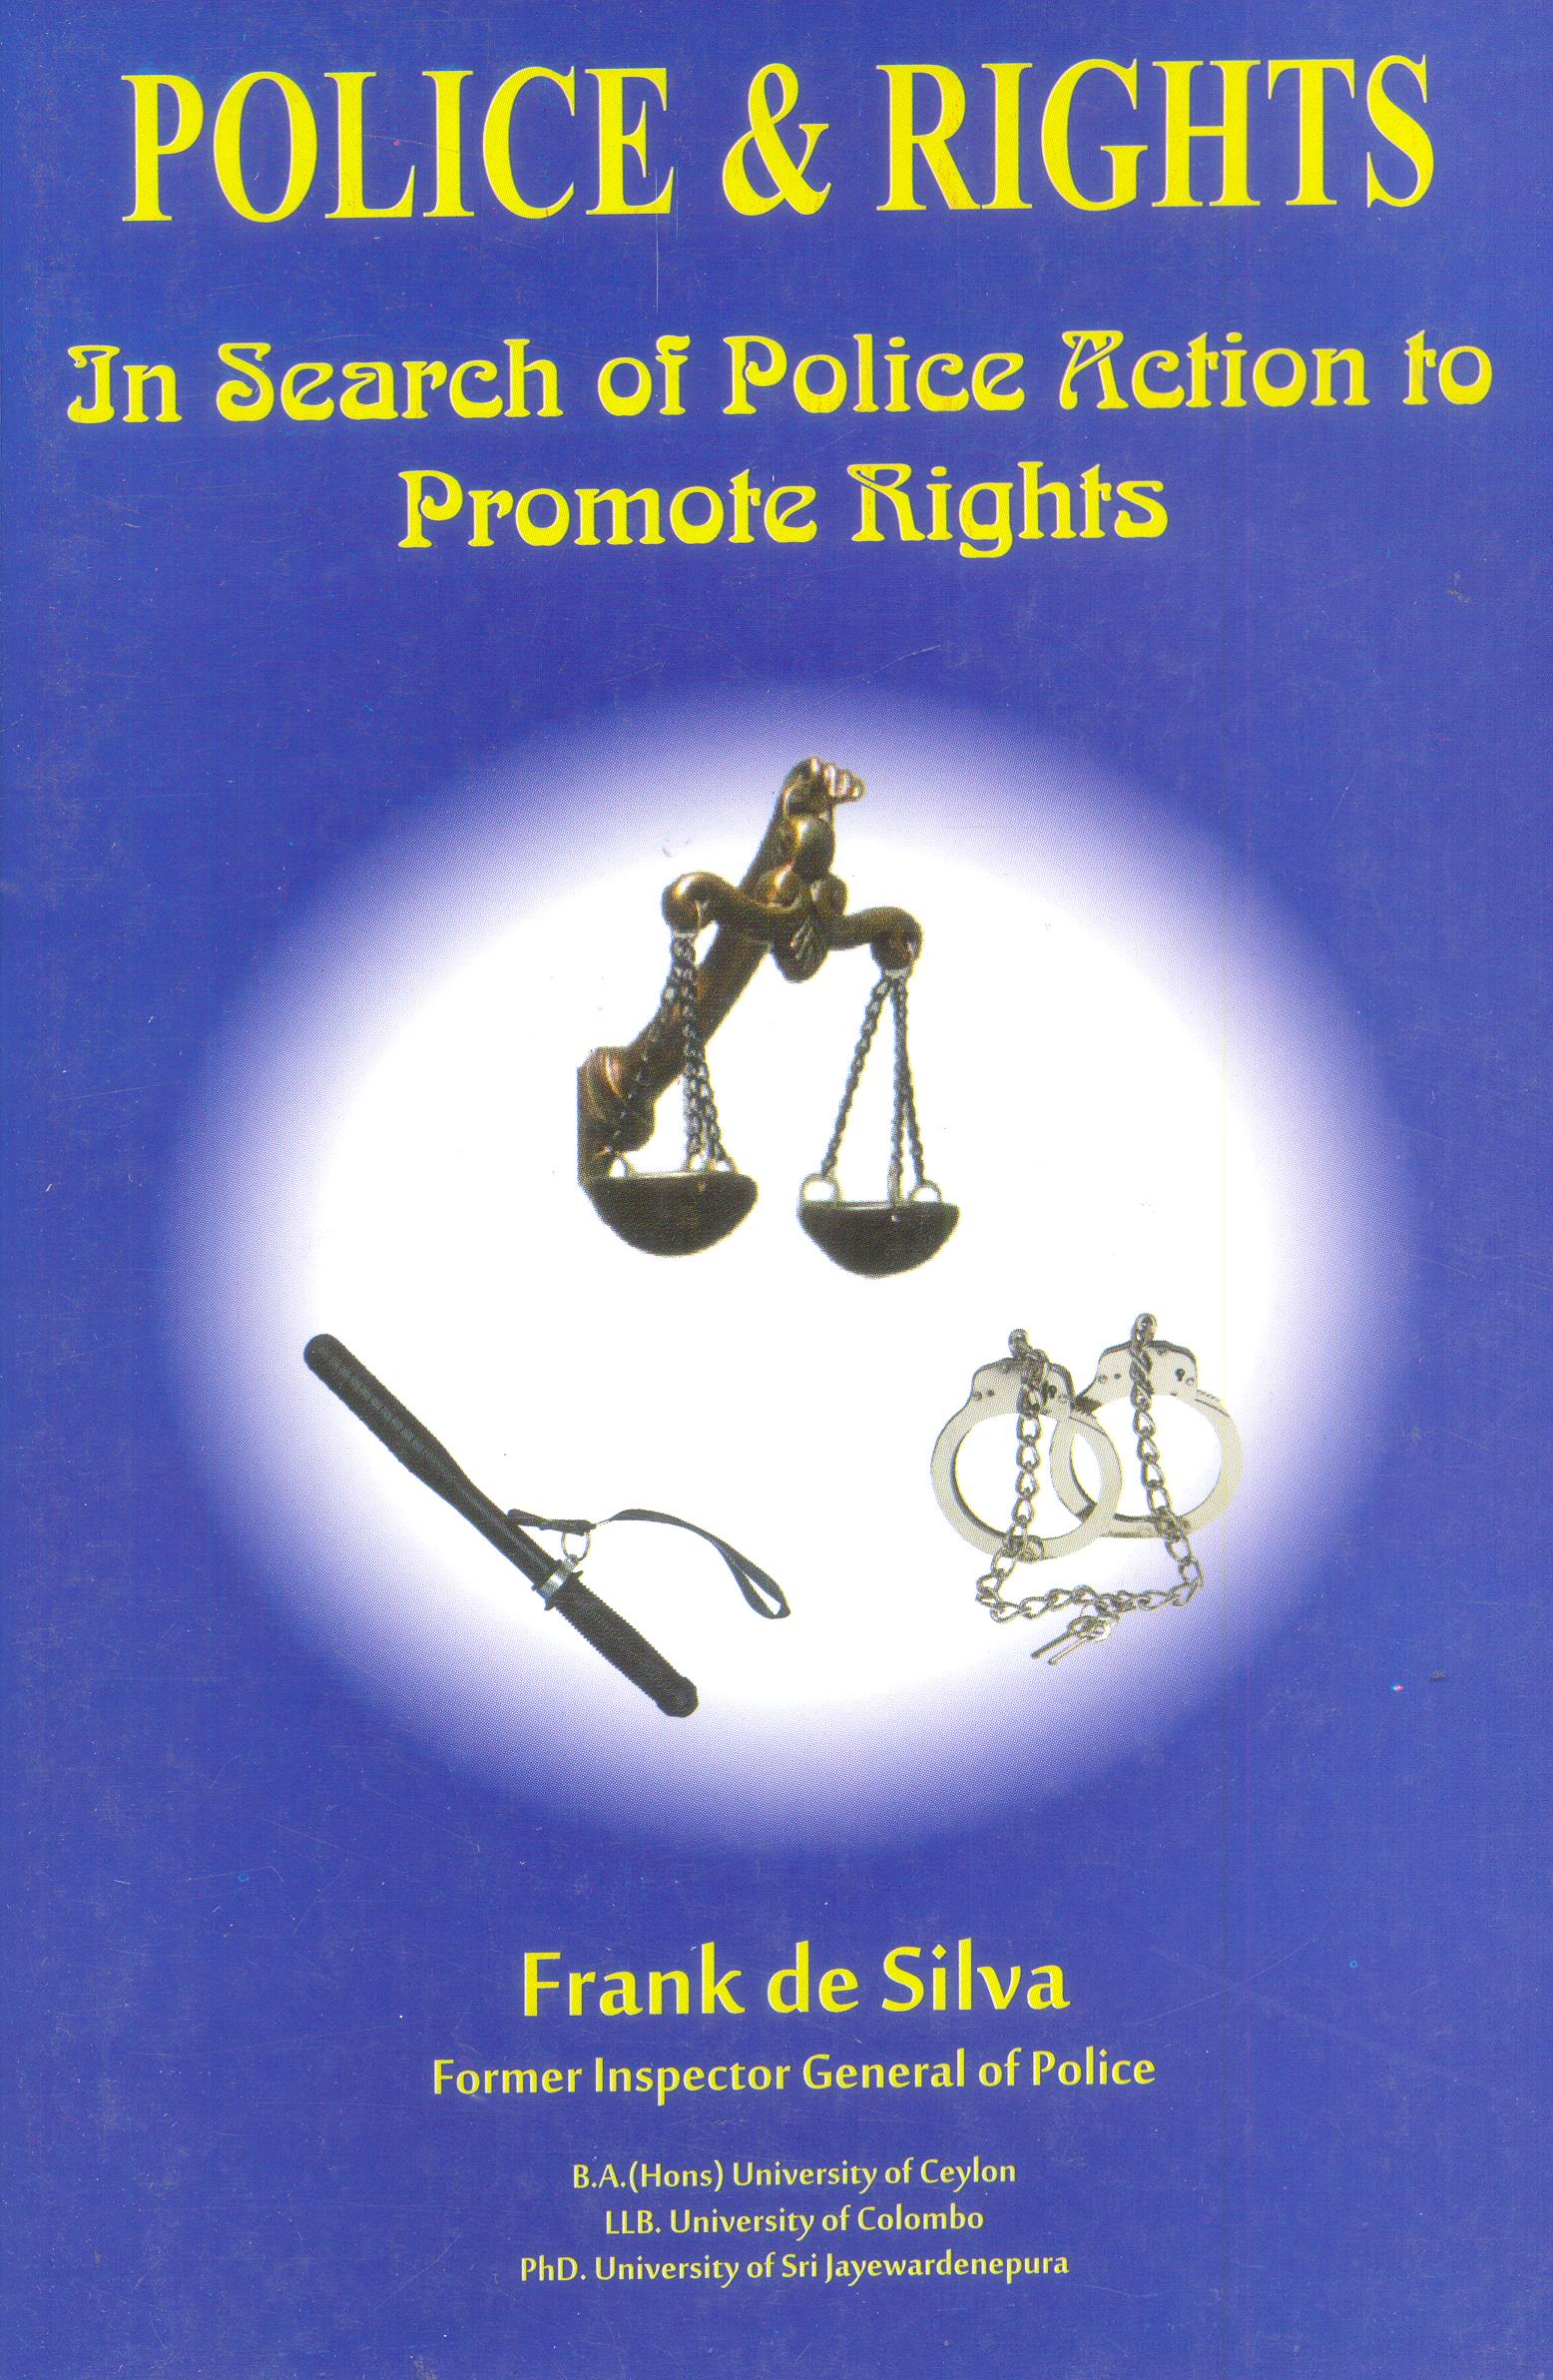 Police & Rights: In Search of Police Action to Promote Rights